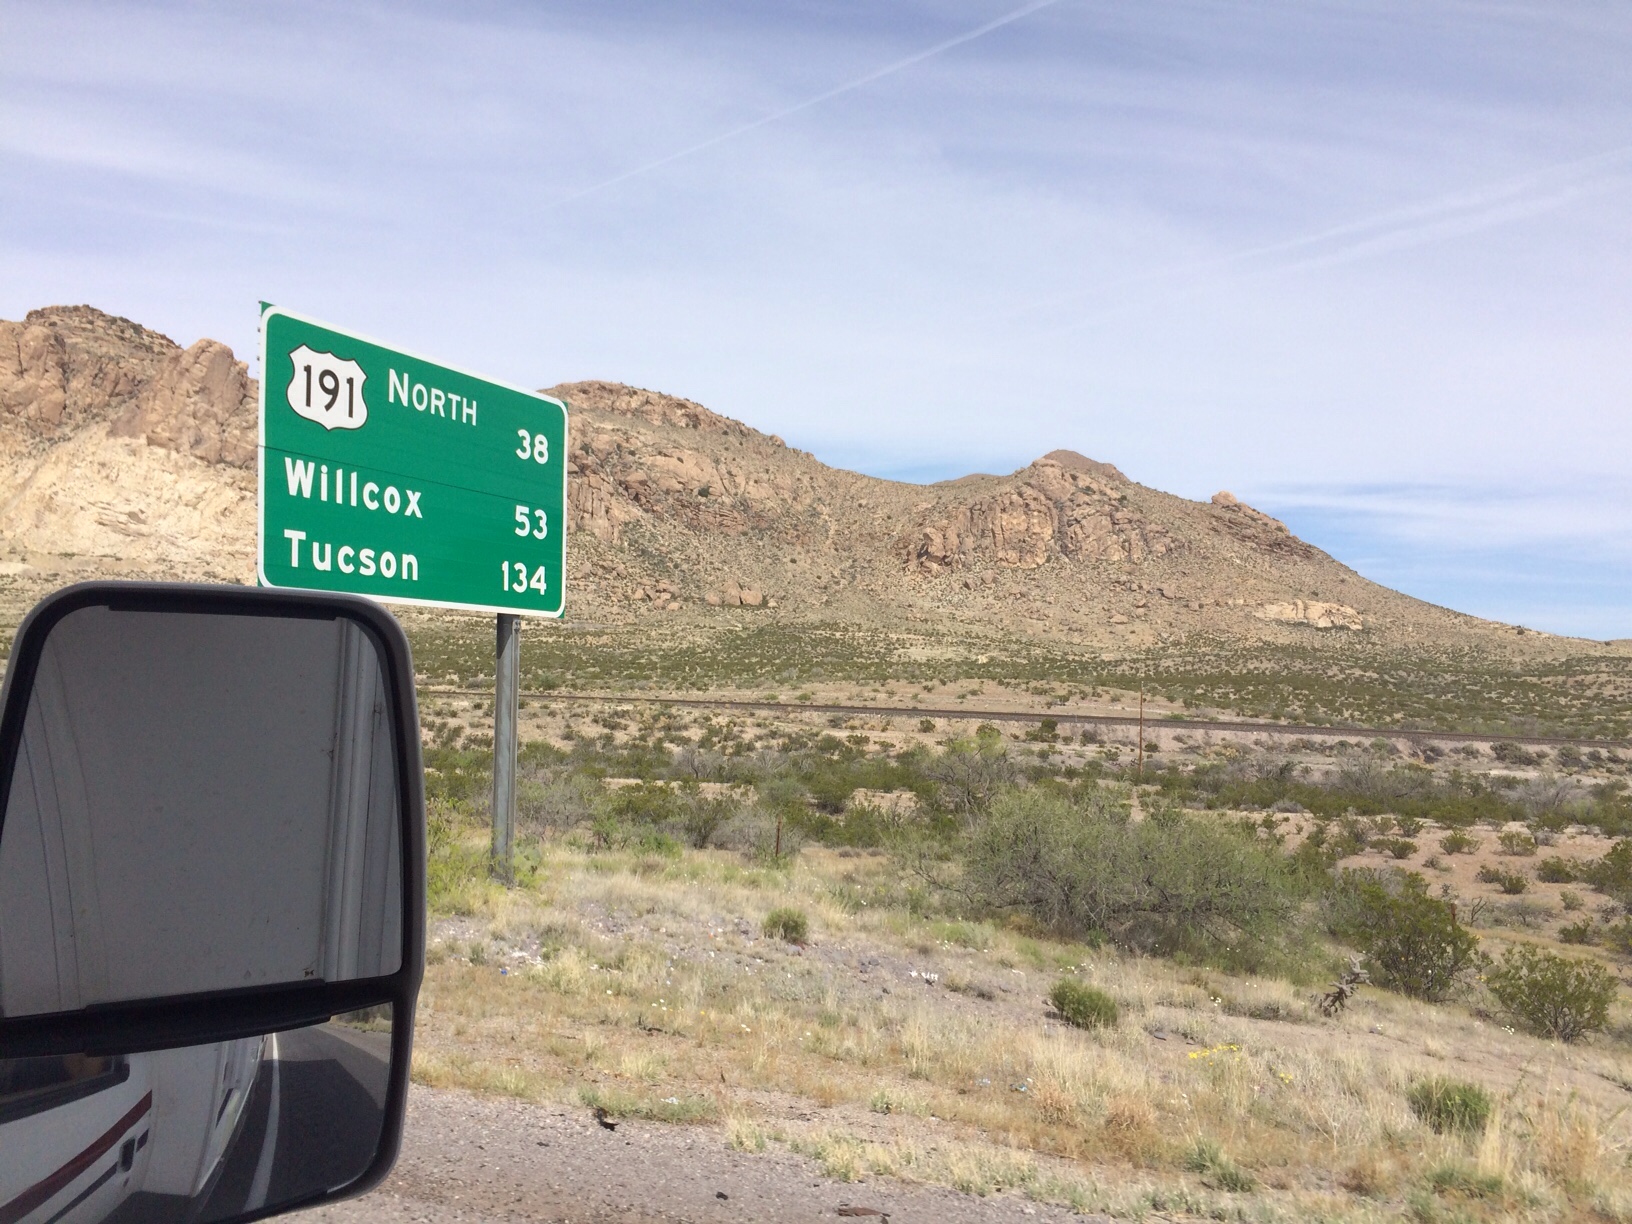 Road sign for Tucson